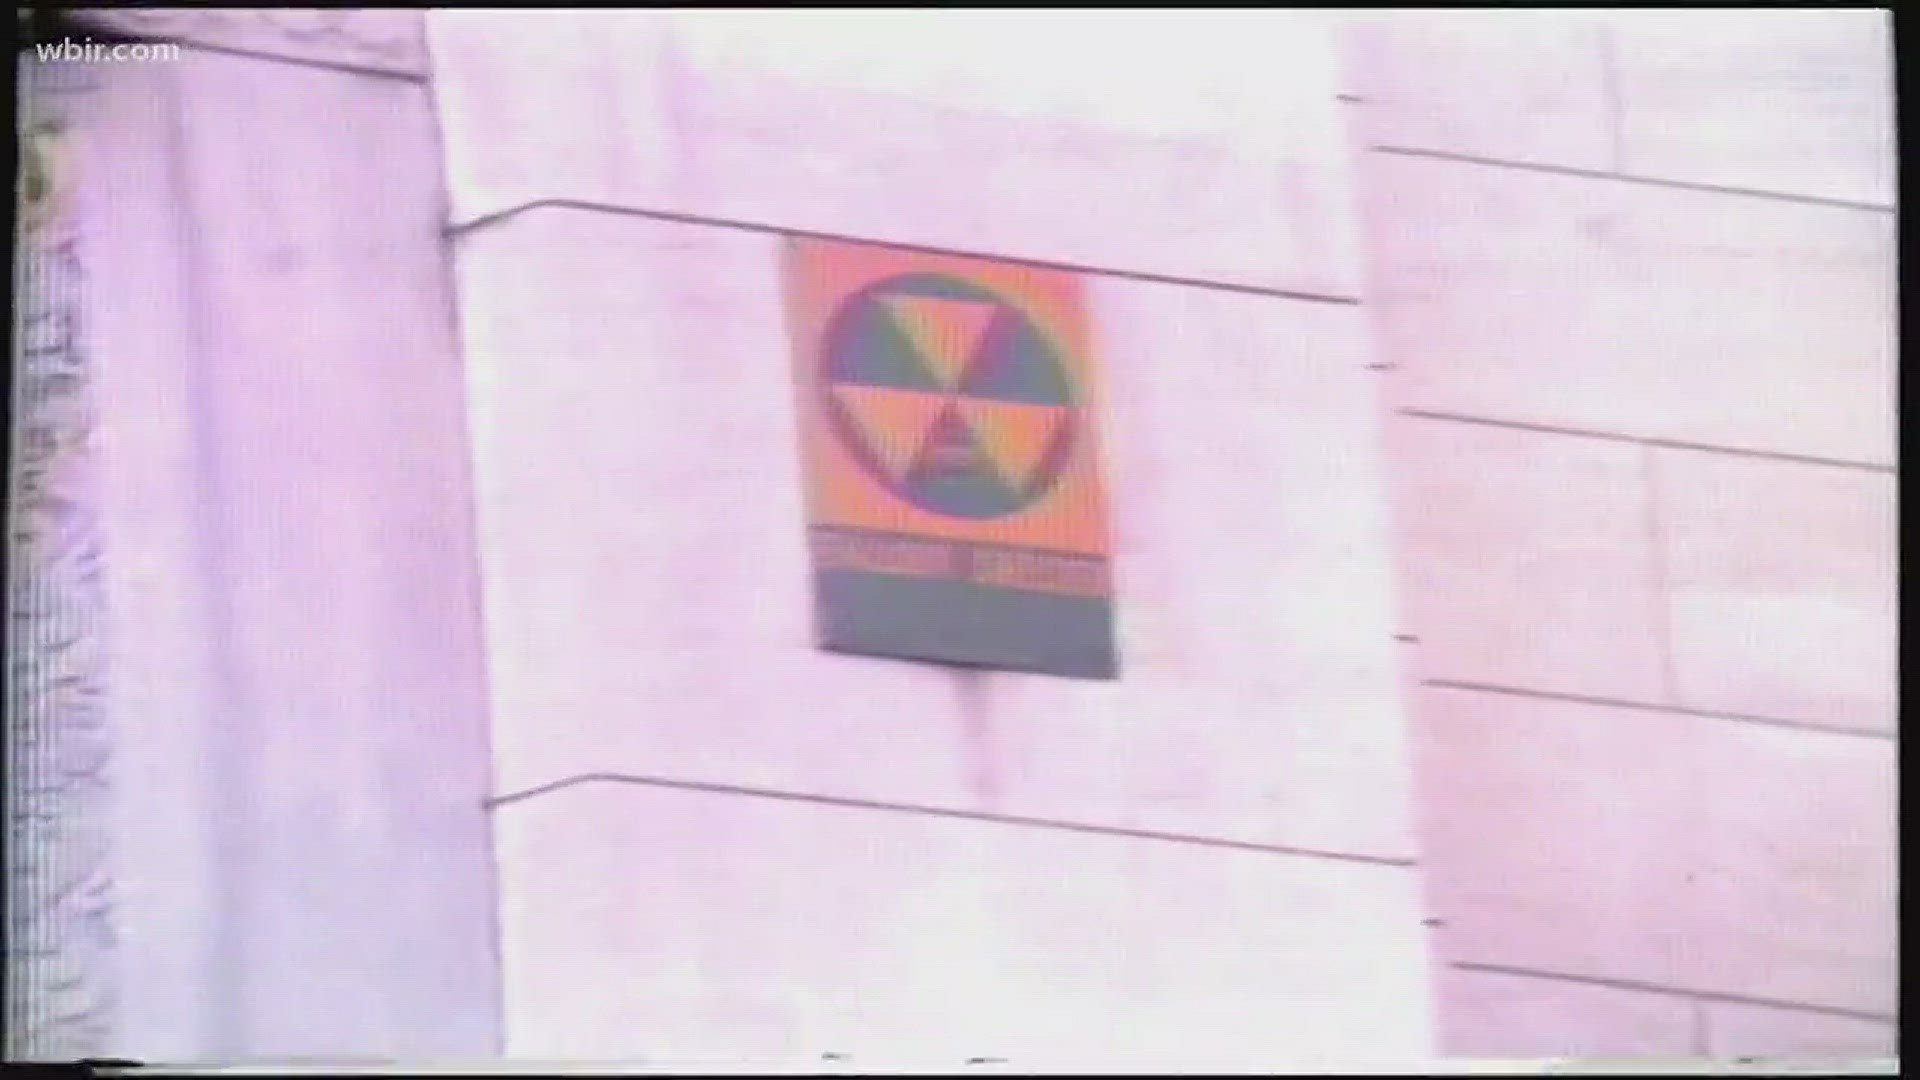 A look at the Cold War era nuclear fallout shelters in East Tennessee.